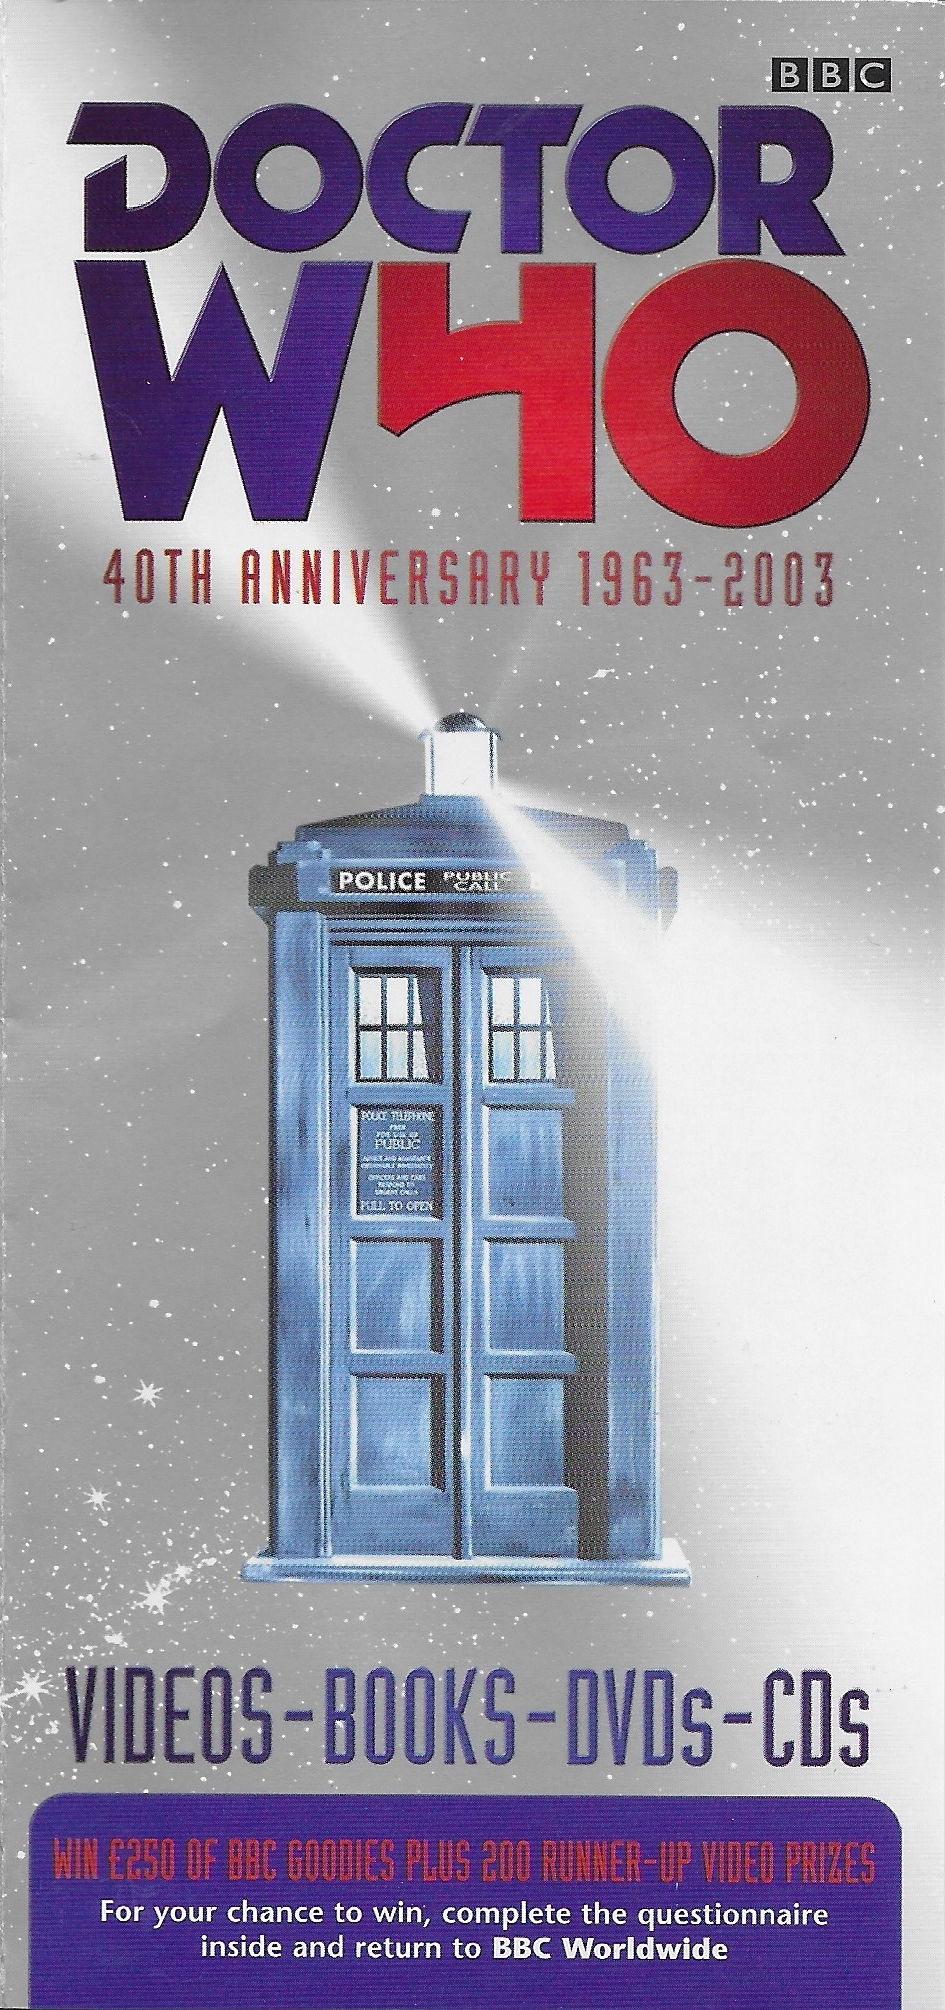 Doctor Who 40th catalogue 2003.